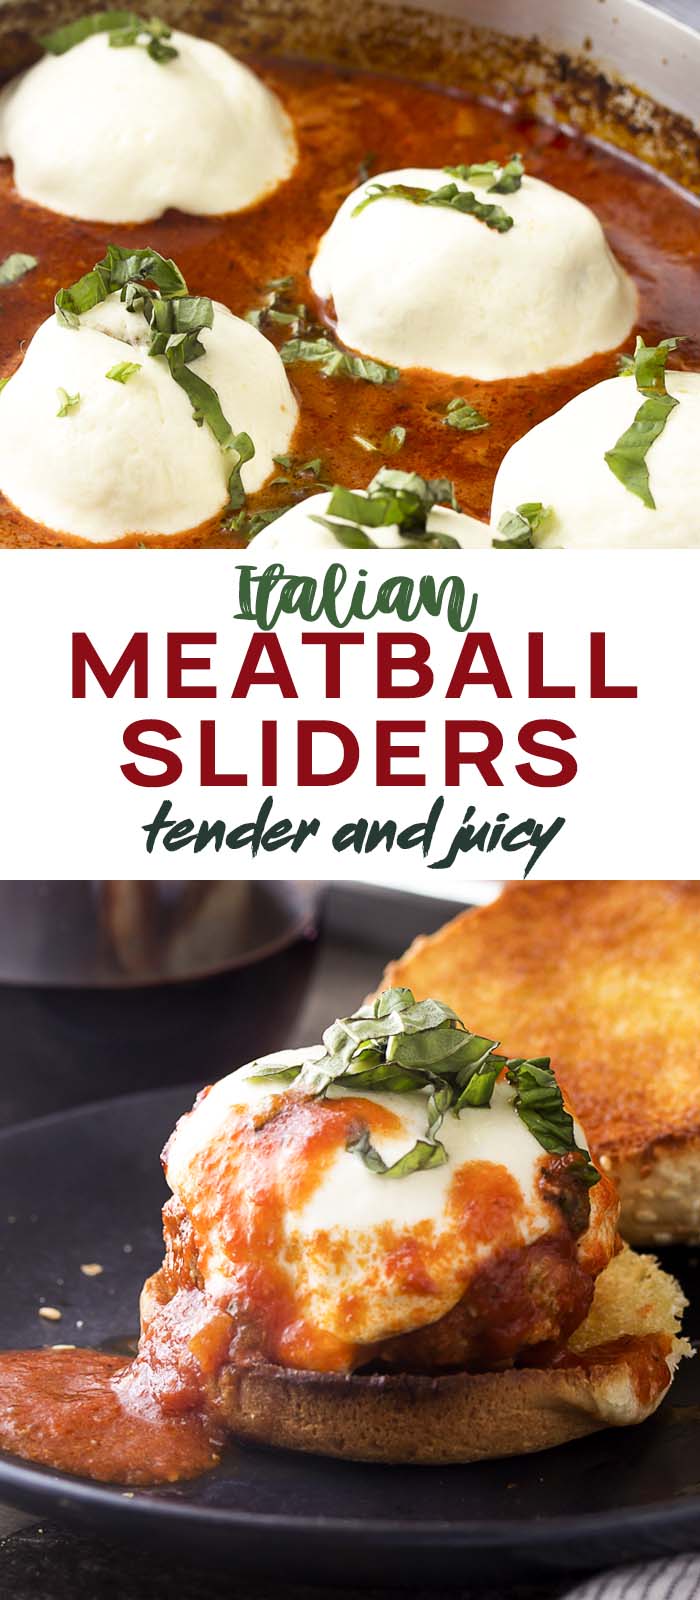 Slider on a bun and covered with sauce and cheese with text overlay - Meatball Sliders.